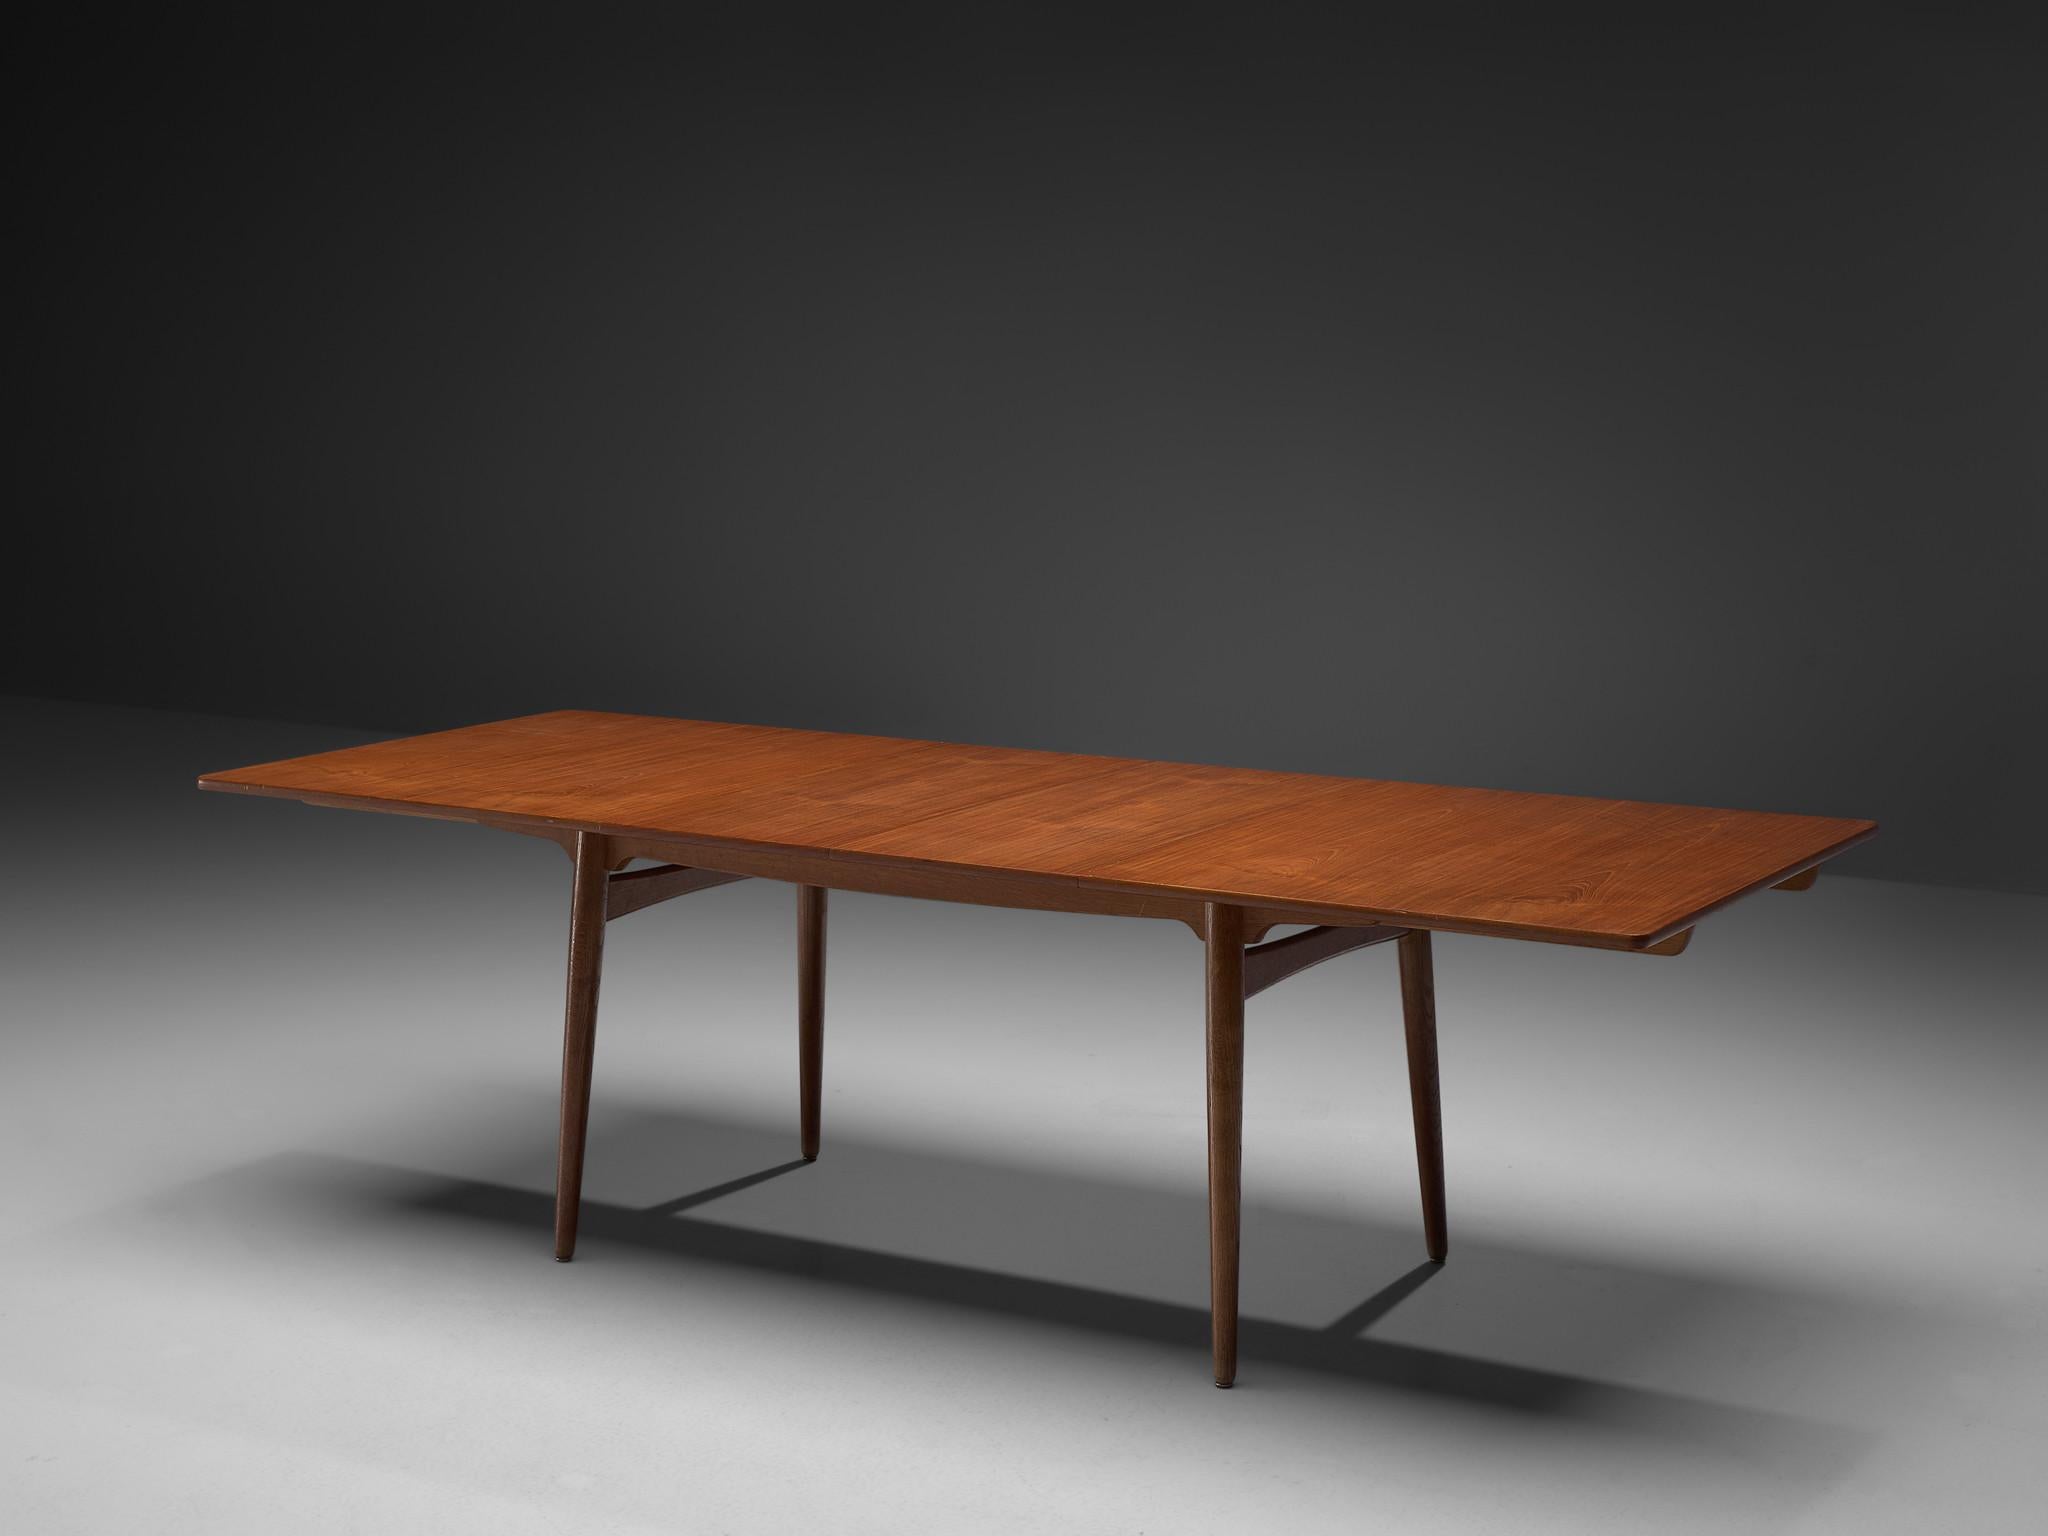 Hans J. Wegner for Andreas Tuck, 'AT-310', teak and oak, Denmark, 1950s.

This extendable AT-310 dining table designed by Hans J. Wegner is made with a teak top and has extra leaves in order to expand the piece from a six-seat (160cm) to a